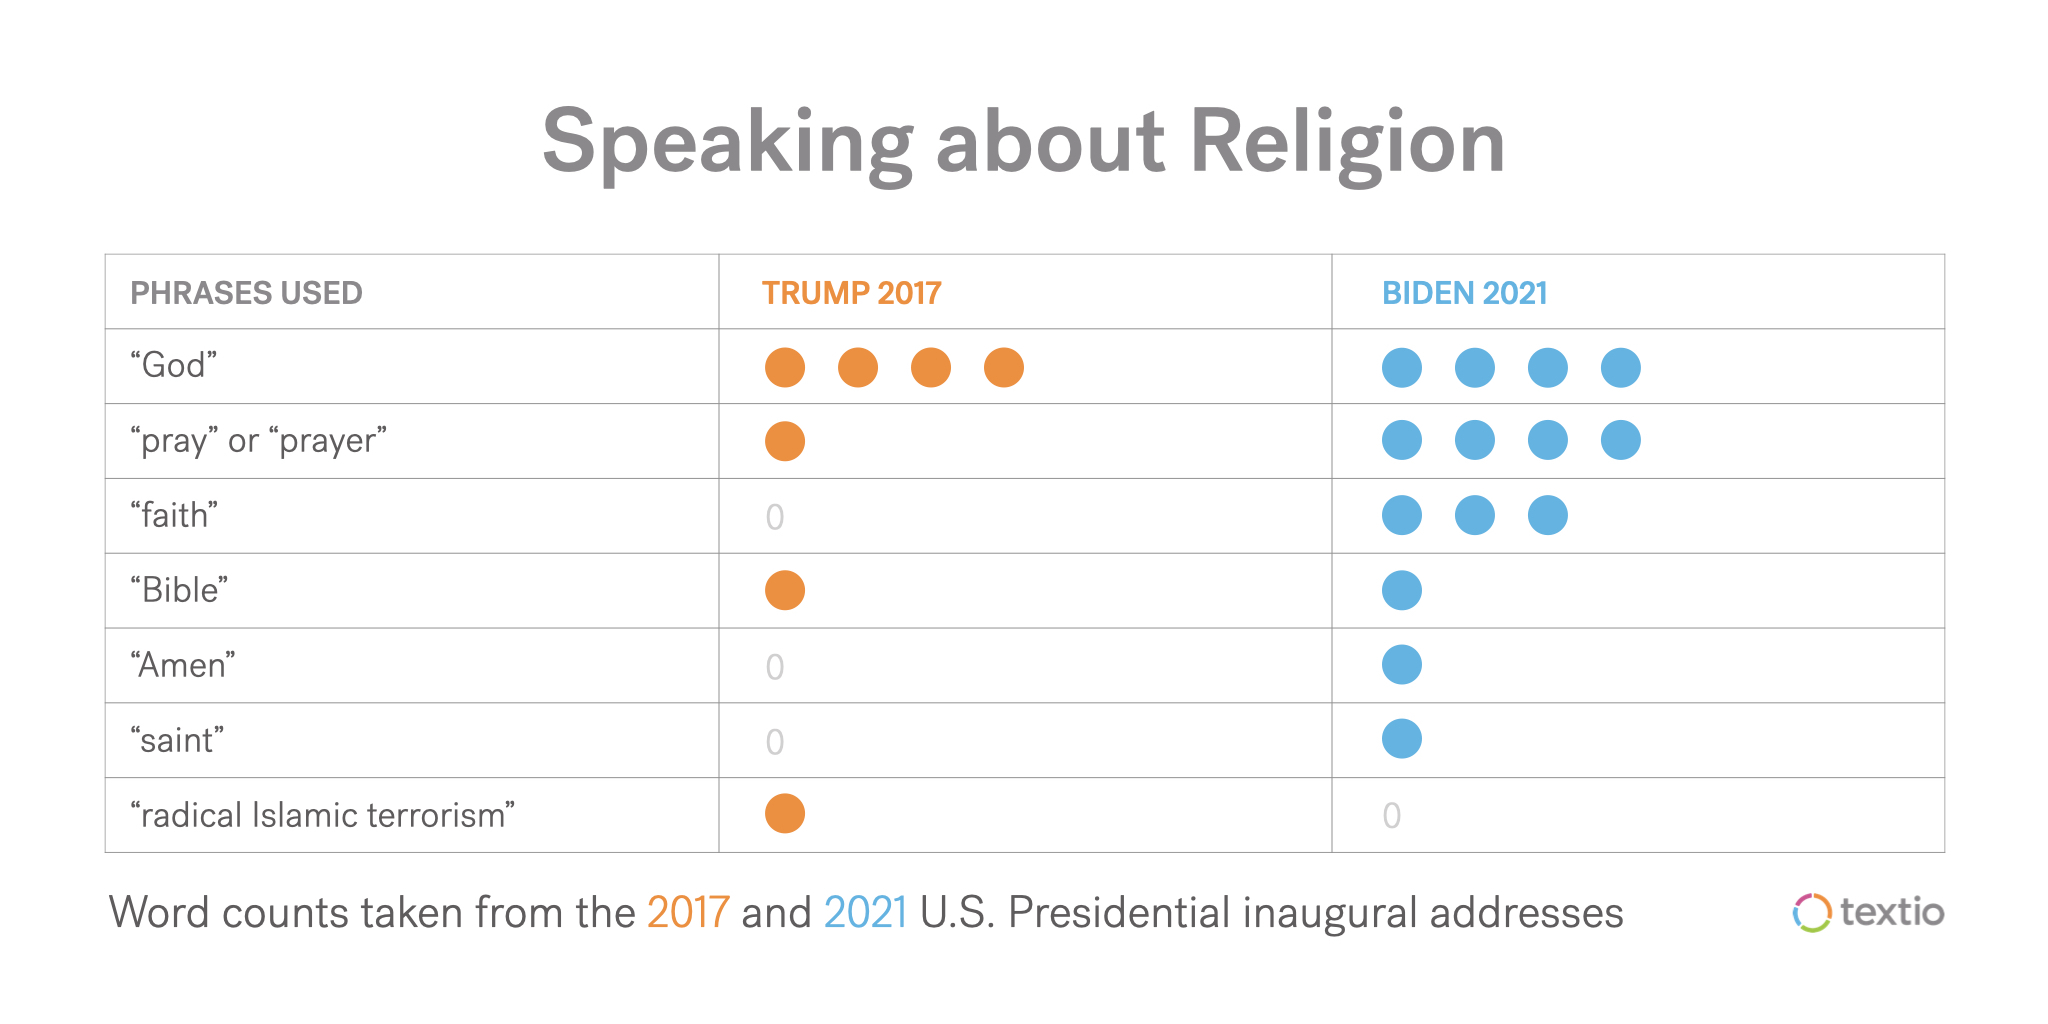 How faith shows up in two very different inauguration speeches: chart comparing mentions of God, pray or prayer, faith, Bible